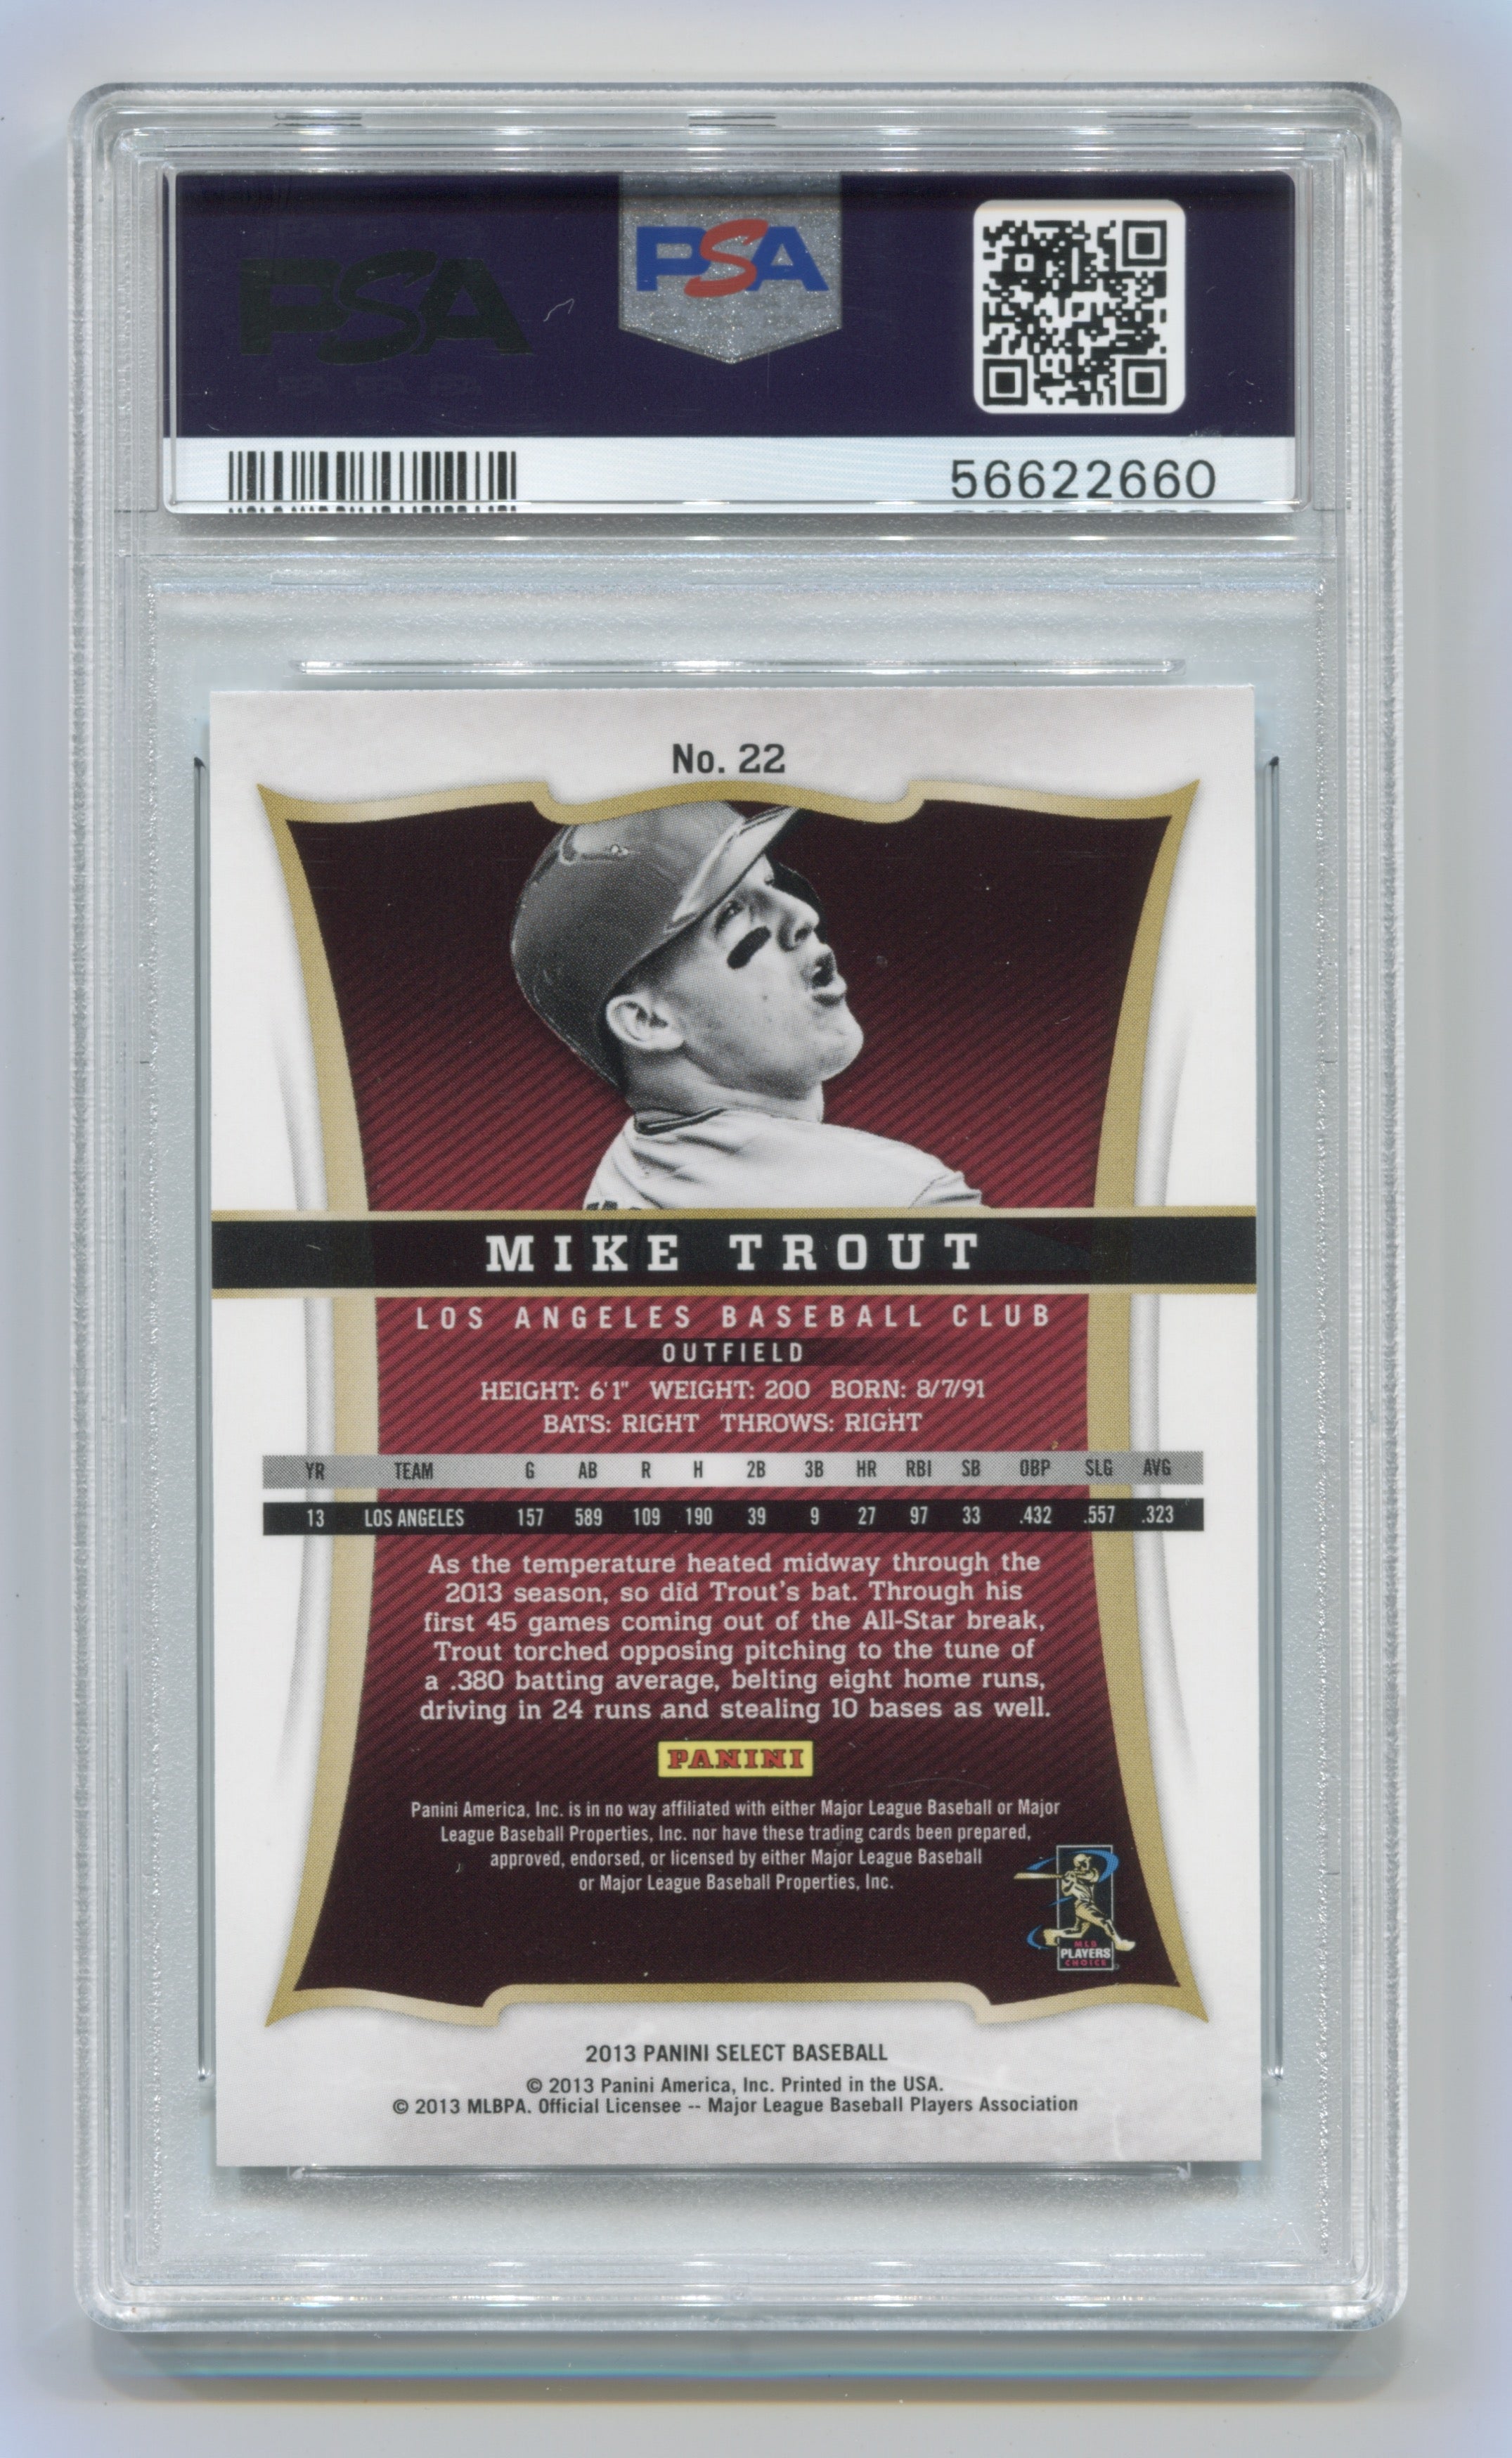 2013 Select #22 Mike Trout PSA 9 | Eastridge Sports Cards